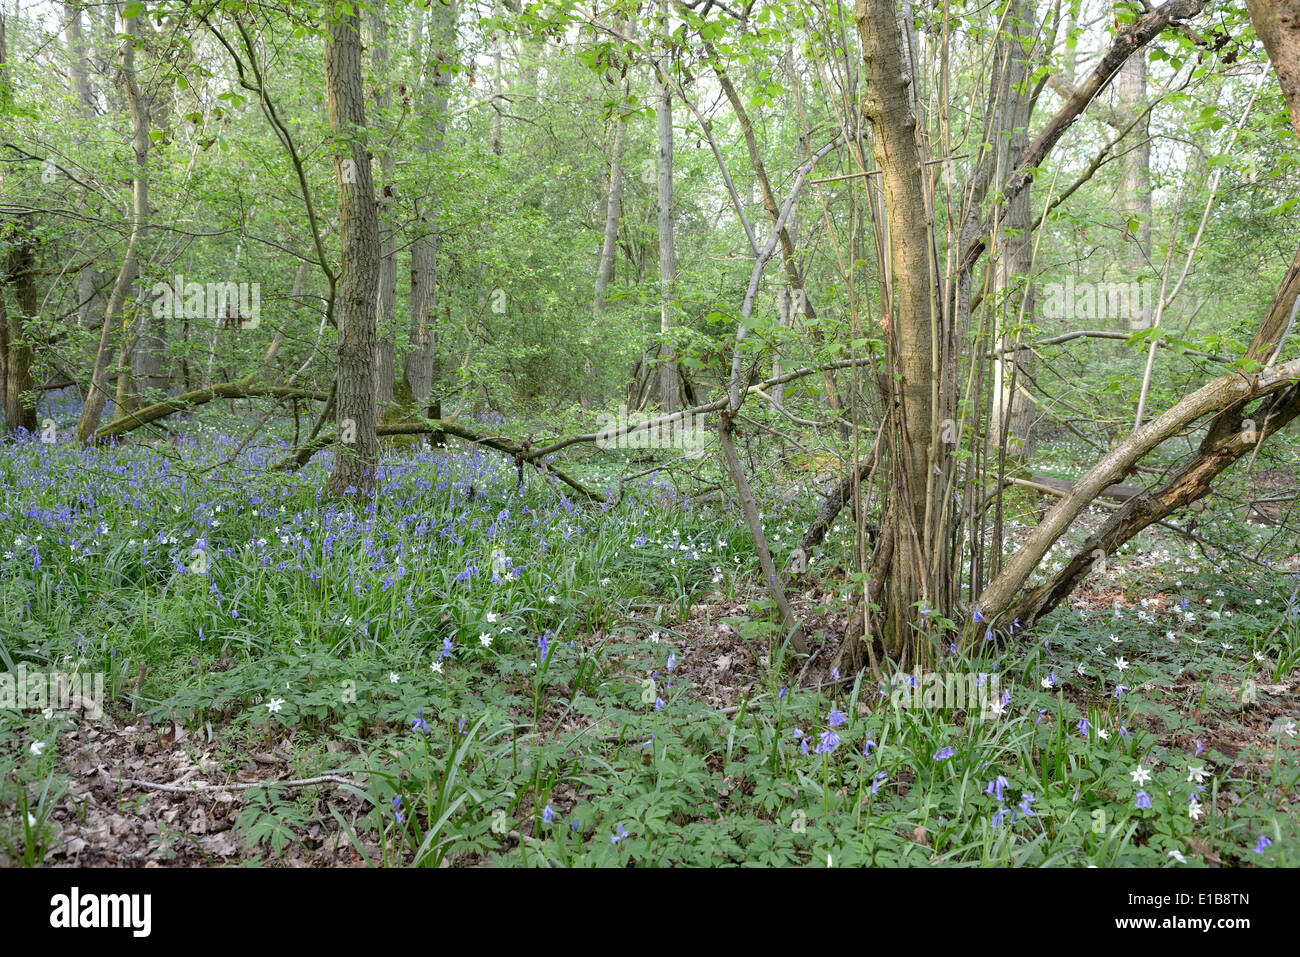 Decoypond Wood  near Steeple Claydon  on the line of the proposed HS2 rail route.  April 24th 2014 Stock Photo